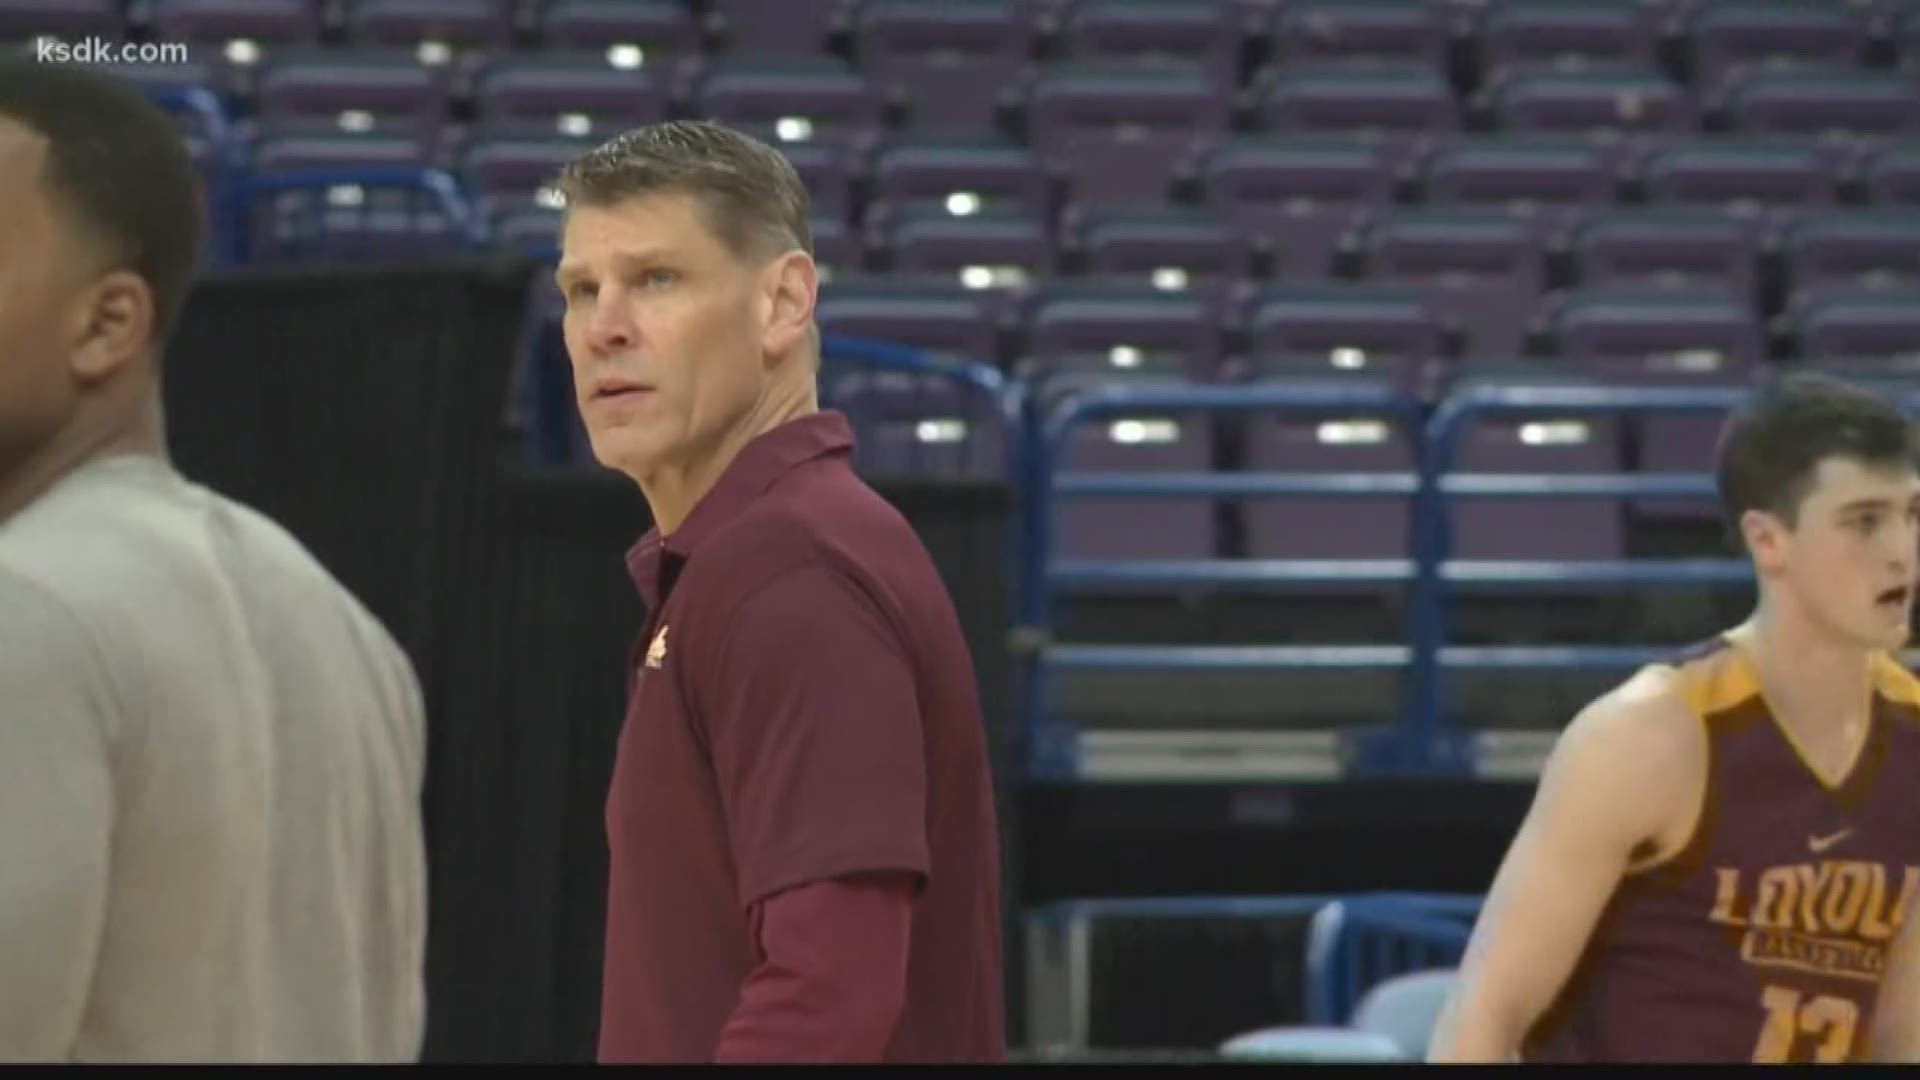 Porter Moser led Loyola Chicago to an improbable Final Four run, but it might not have happened without Tucci.